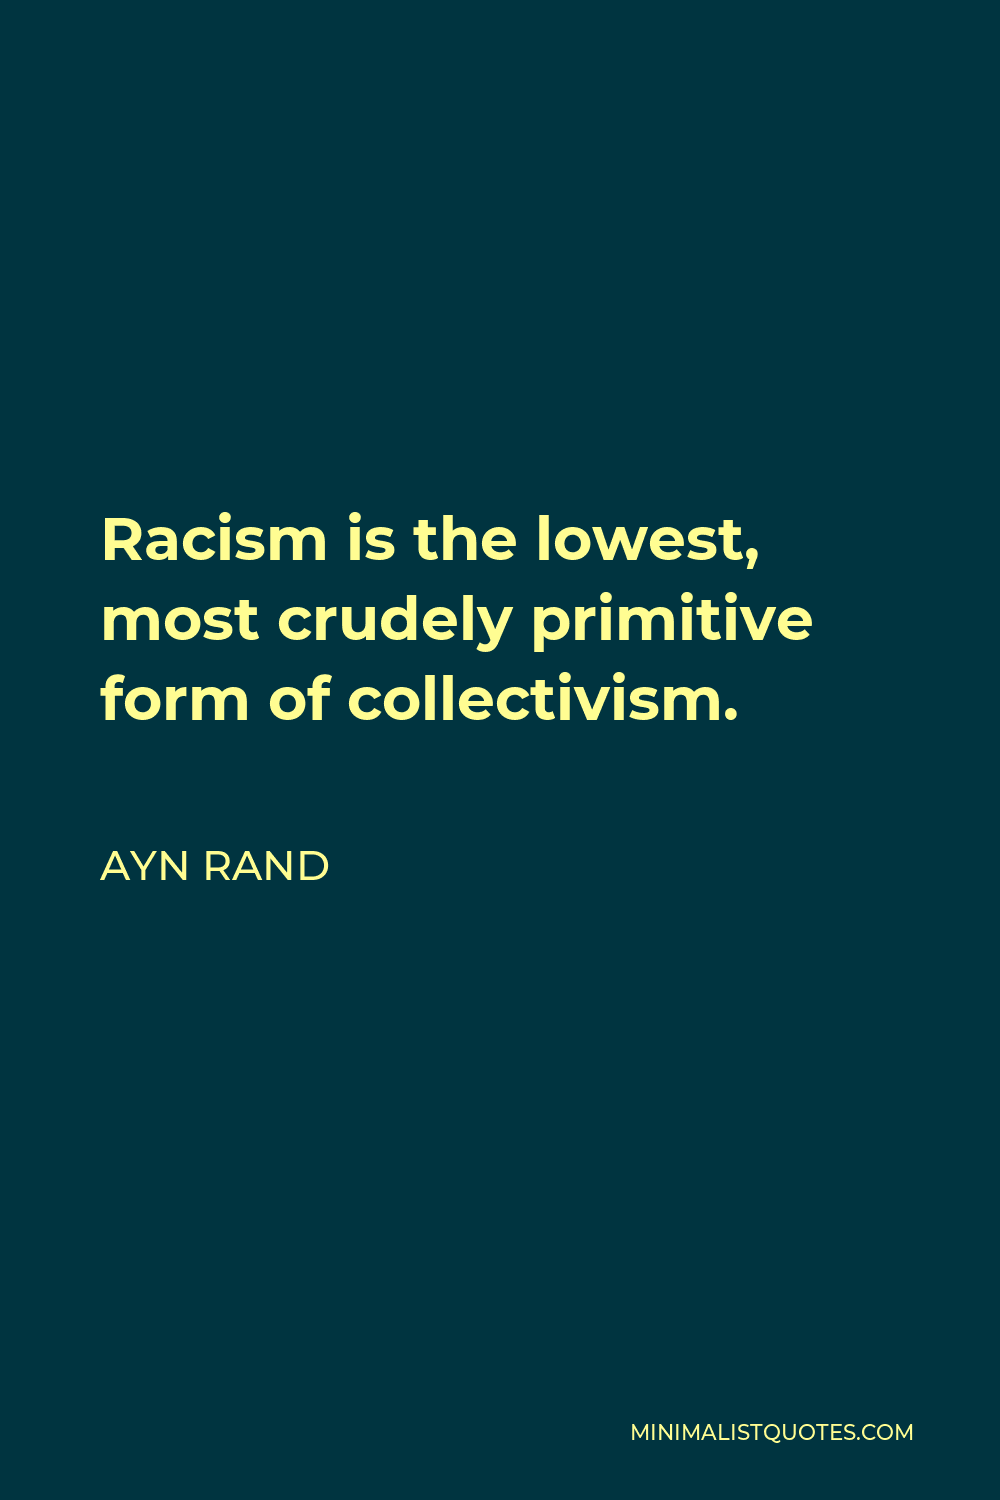 Ayn Rand Quote - Racism is the lowest, most crudely primitive form of collectivism.